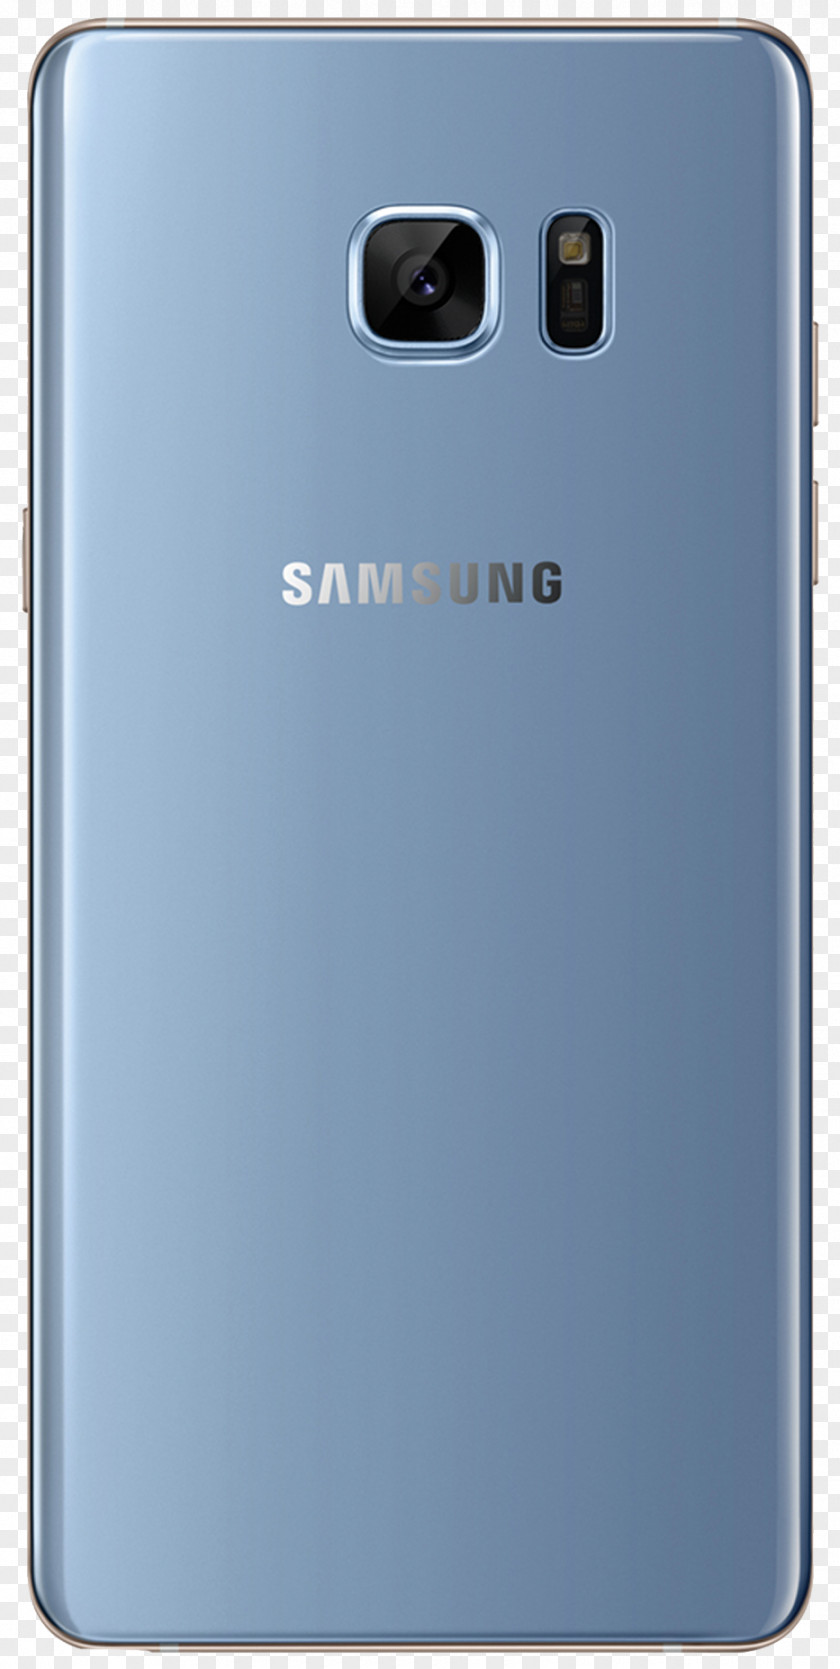 Samsung Galaxy Note 7 J2 Pro S III Telephone PNG